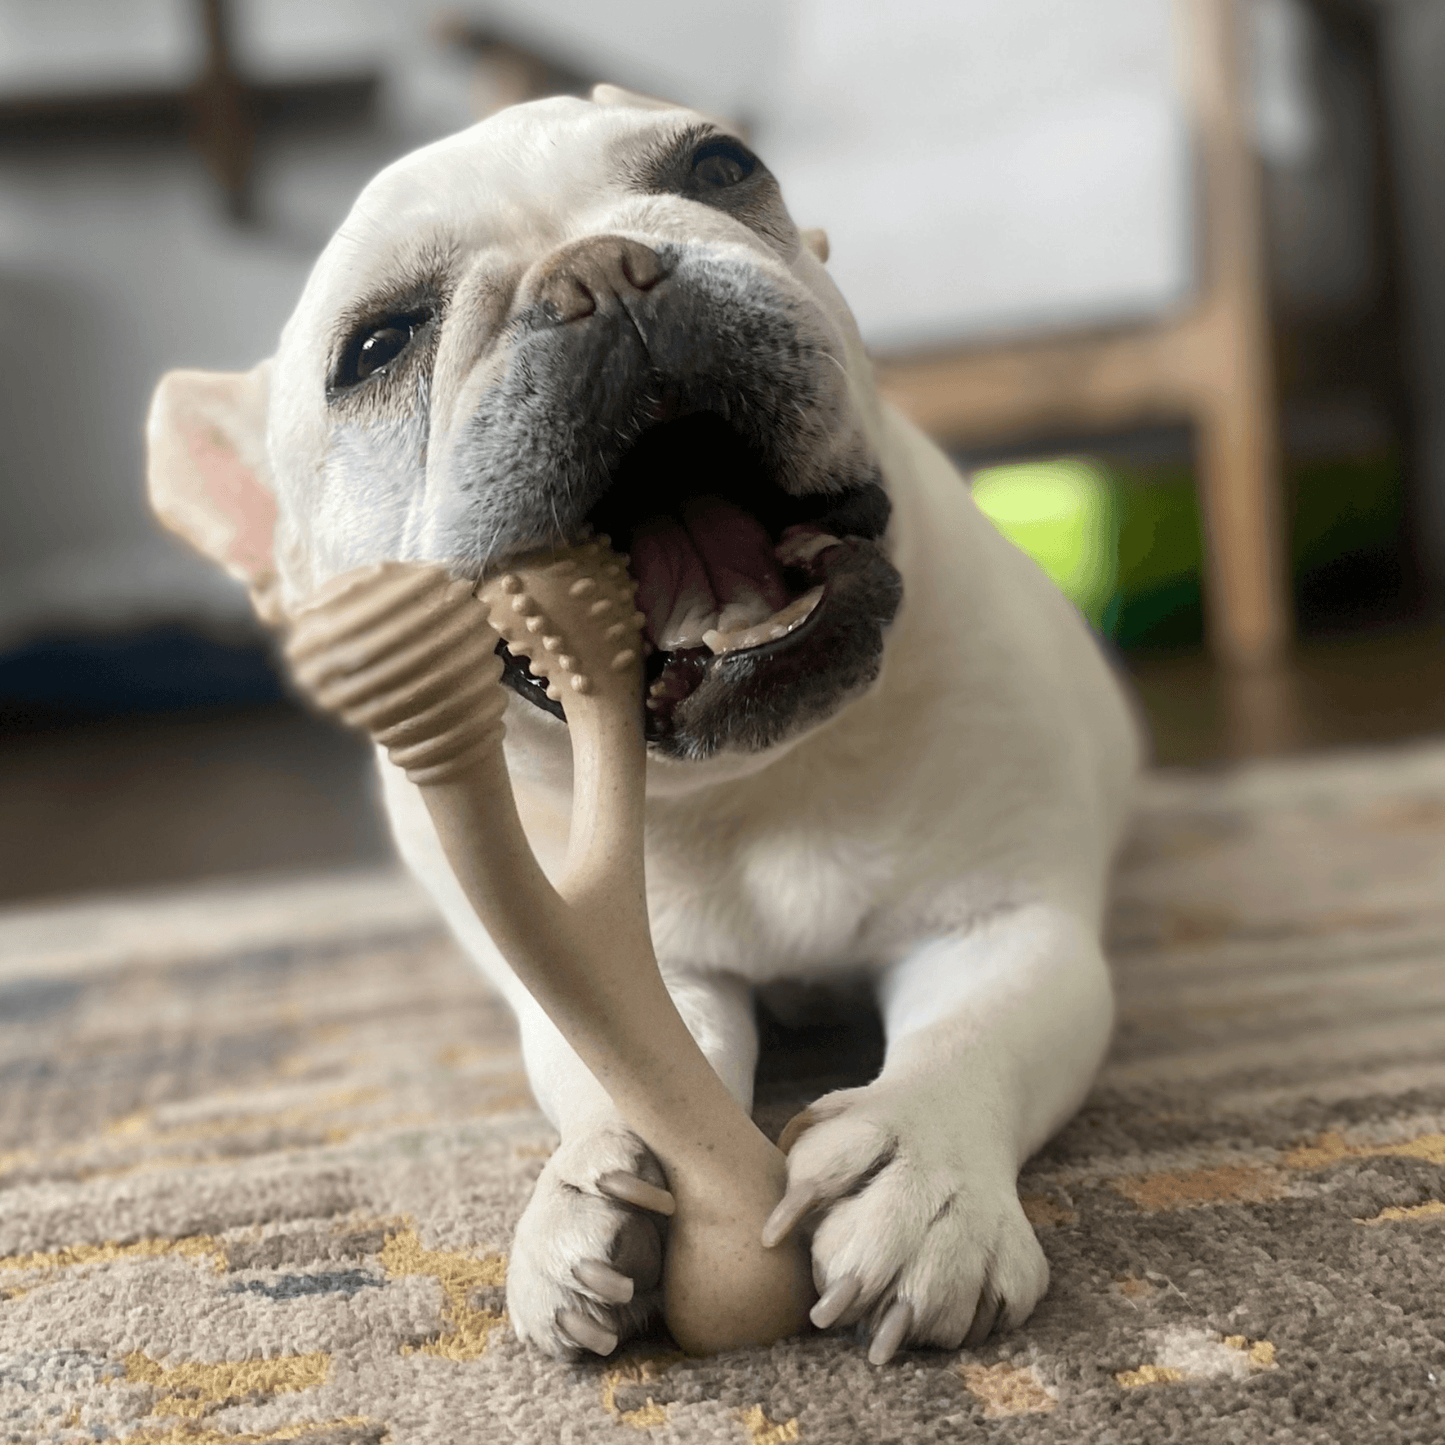 BetterBone TOUGH | Durable All-Natural, Food-Grade, Eco-Friendly, Dental Cleaning Chew for Aggressive Chewer Dogs & Puppies by The Better Bone Natural Dog Bone - The Hammer Sports